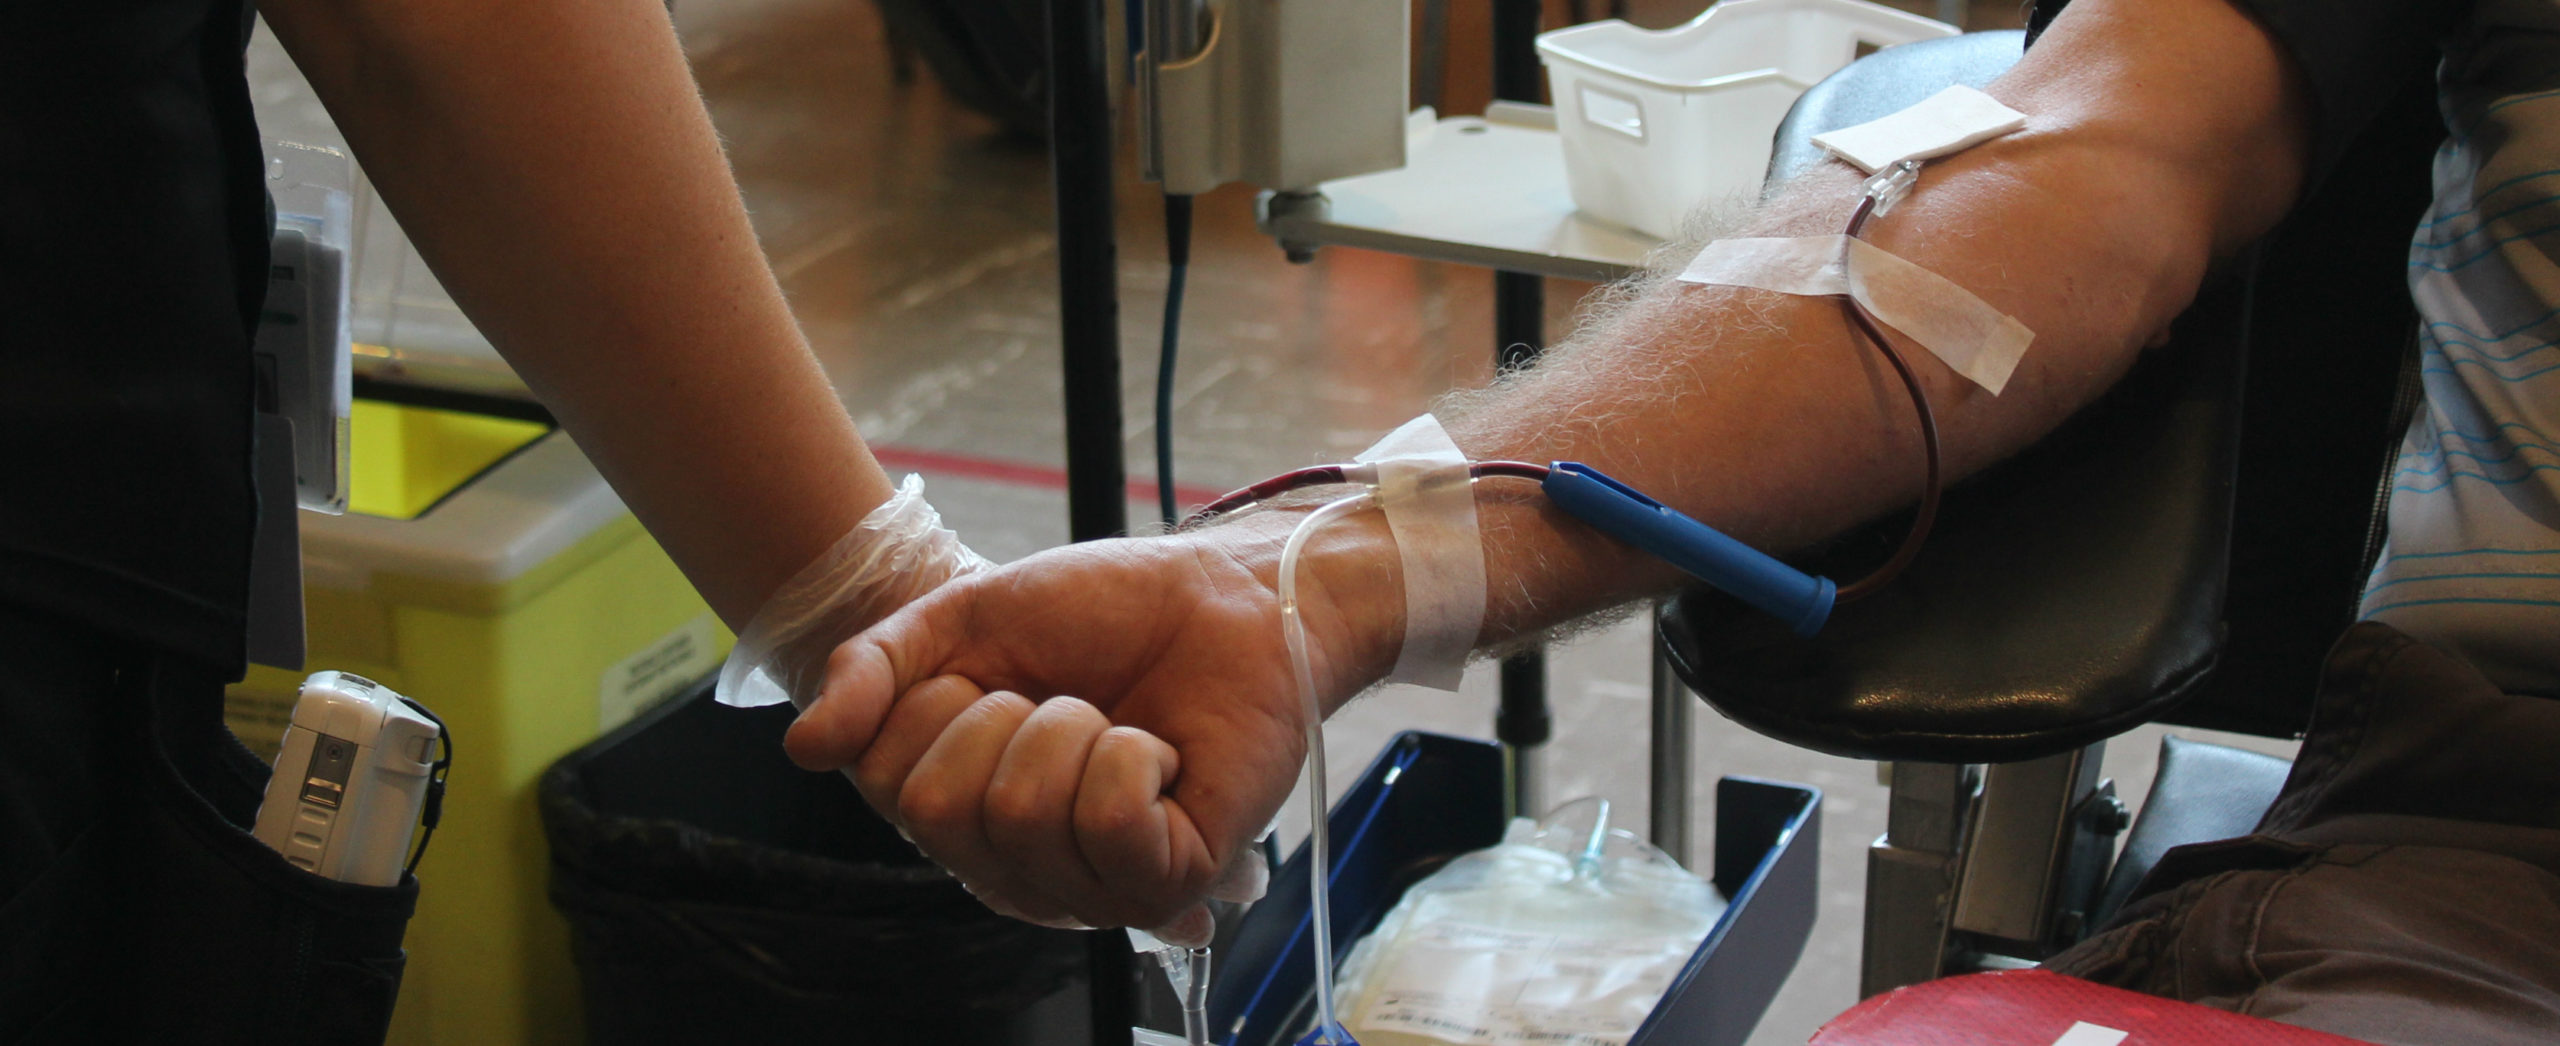 Health Canada approves ending blood donation ban for gay men